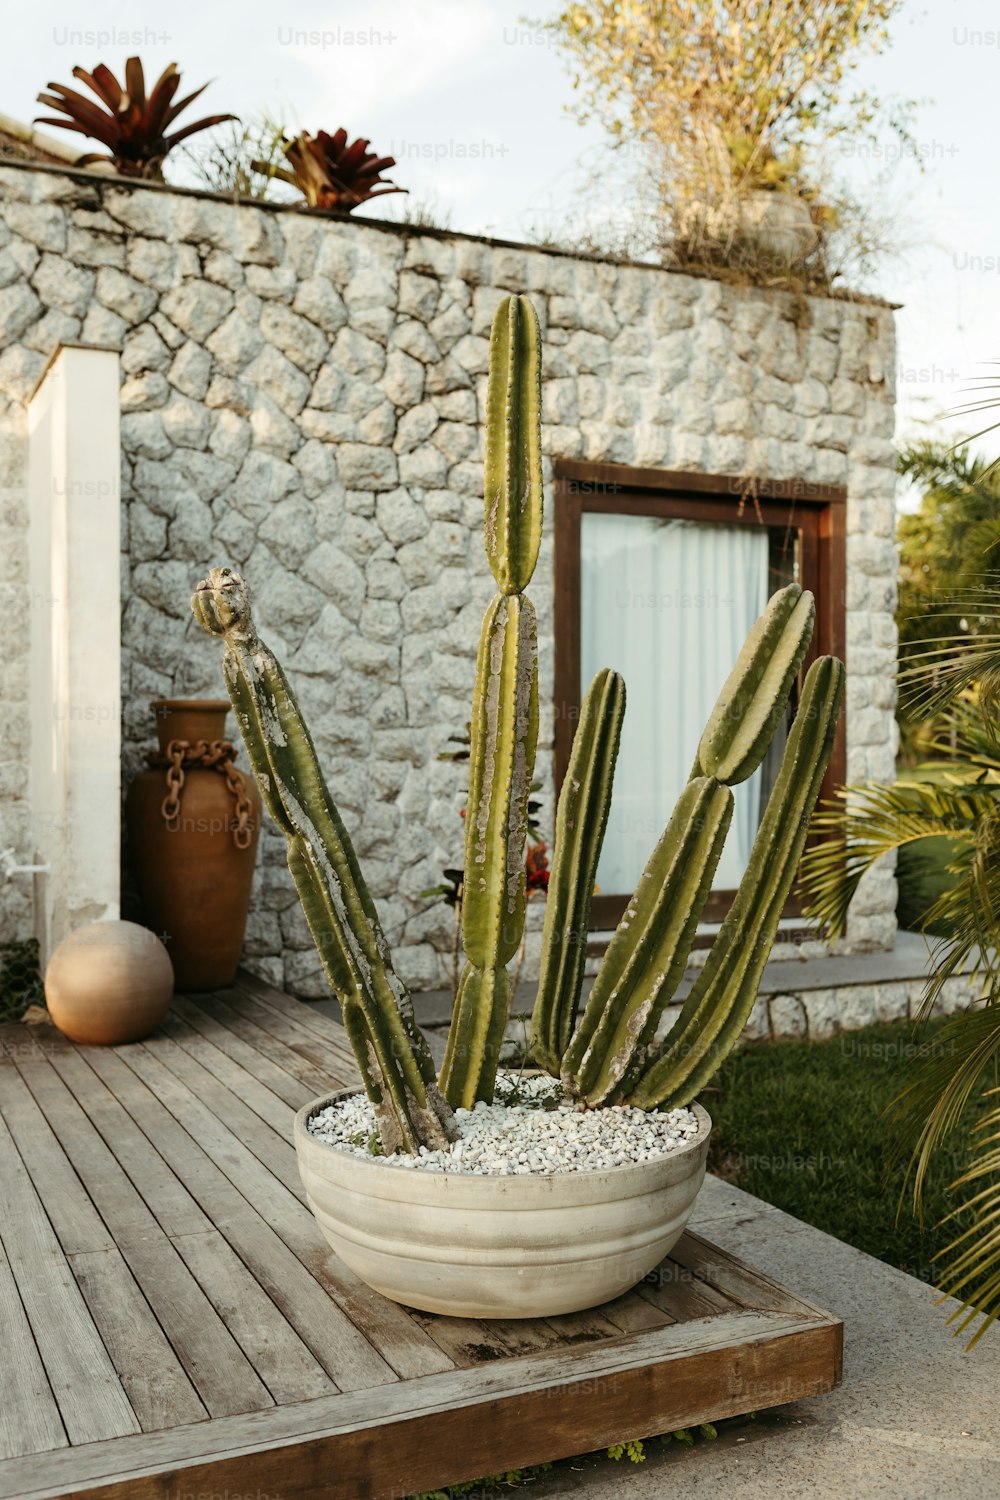 a cactus in a pot on a wooden table